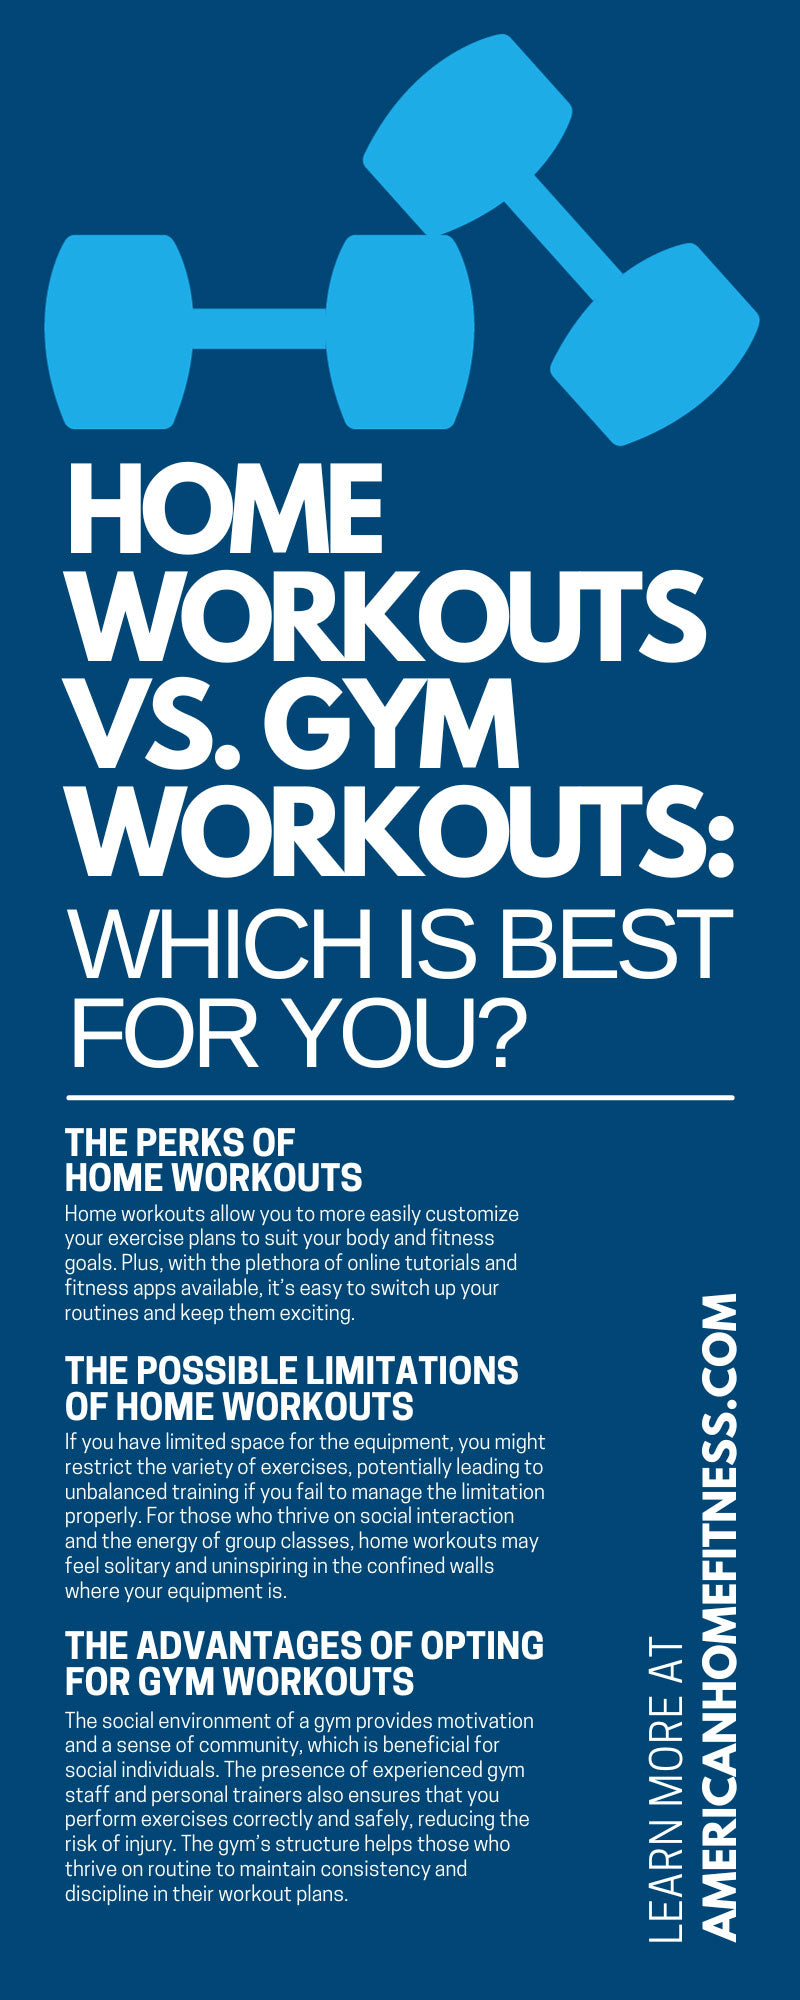 Home Workouts vs. Gym Workouts: Which Is Best for You?